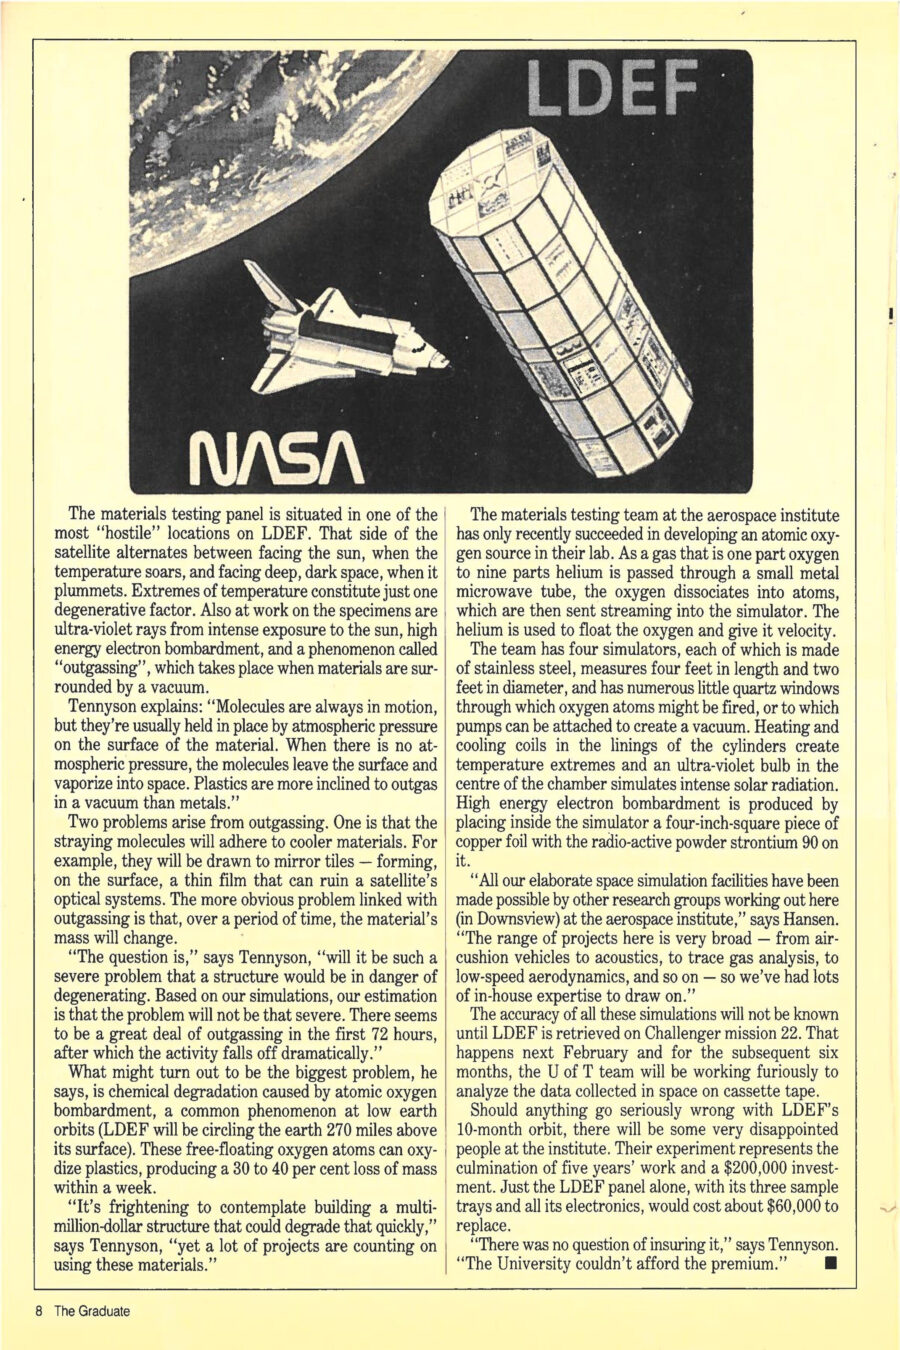 Magazine clipping from The Graduate, May/June 1984
Headline: Materials testing in orbit: Working on zero distortion
Byline: Pamela Cornell
Illustration 1: A man holds a beaker high before him, the beaker contained in a the lines of a box, black space surrounding them, satellite pieces and components cluttering the edges of the frame.
Illustration 2: A man stands at control station, computers behind him, the planet earth with giant radar dishes on it visible through tall windows. On the opposite panel, the scene continues, the tube-shaped body of the LDEF hovering in the sky.
Illustration 3: The tube-shaped body of the LDEF hovers in space, the space shuttle visible in the distance behind it, and in back of them both, a section of the earth is visible, as seen from space.
Rod Tennyson smiles as he leans back in his poolside chair – a cold drink in one hand, a fat cigar in the other. A few miles down the Florida beach, Jorn Hansen runs alone along the shoreline – pushing himself to go as fast as he can. Off the Florida Keys, Gerry Mabson propels himself through an underwater world filled with exotic plants and brilliantly coloured fish. The unifying factor for these three men is orbiting 270 miles above the earth’s surface, an experiment they have collaborated on for five years, and has brought them from the University of Toronto Institute for Aerospace Studies to the Kennedy Space Center at Cape Canaveral. The three relax having witnessed the lift-off of the space shuttle Challenger on its thirteenth mission. Inside Challenger’s cargo bay was a satellite called LDEF (for long duration exposure facility). The satellite carried 70 experiments, the only Canadian entry belonging to their University of Toronto group.
The U of T experiment was designed to test the effects of ten months in space on various tough new materials. Strong, lightweight materials could prove suitable for future orbiting structures, making the results of the experiment important to both the U.S. space program and Canada’s flourishing industry in communications satellites. “Over the past five years, we’ve been developing ground-based simulation facilities for testing materials and we wanted to find out if our simulations were reasonably close to what would actually happen in space,” says Tennyson.
LDEF is Challenger’s heaviest payload to date, a 132-sided polygon, 30 feet long, 15 feet in diameter, weighing 25,000 pounds. Launching LDEF was a tricky operation, the largest structure the Canadarm had ever lifted out of Challenger’s cargo bay.
Now that the mission is underway, the U of T experiment is busy documenting the deterioration of materials composed of fibres embedded in polymer matrices. Some of the fibres are familiar from their use in sports and automotive equipment. Kevlar is used in canoes, bullet-proof vests and to reinforce tires. Graphite is used in skis, tennis racquets, golf clubs, automotive torque shafts and the exterior of the F-18 fighter plane. Boron is used primarily in aircraft and expensive racing bicycles. “The beauty of these composite materials,” says Tennyson, “is that they’re as strong and as stiff as aluminum alloys but they weigh half as much. Also, we can design these materials so they don’t expand and contract in response to the extreme temperature variations in space. By varying the orientation and ‘stacking pattern’ of the fibres in the polymer base, we change the properties. Our designs are worked out using equations aimed at achieving zero thermal distortion.”
The experiment occupies half an LDEF panel. Sharing the same panel are a crack-propagation experiment from the University of Michigan and one from the University of Kent measuring micro-meteoroid bombardment. U of T’s component consists of three trays of samples, mounted in both tubular and flatplate form and fitted with electronic instrumentation. (Gerry Mabson’s master’s thesis project was to come up with a durable design for the tray structure.) Below the trays are a battery pack and a data-logging system that will record for two seconds every sixteen hours the temperature of and corresponding strain on the various samples. Initially the thought was to have a passive experiment, where the samples would only be studied upon their return. But adding instrumentation enhanced it significantly. They worked to lay out the circuitry and eventually got it down to fit a shoe-box-sized container “ruggedized” to withstand the rigors of its journey.
The materials testing panel is situated in one of the most “hostile” locations on LDEF. That side of the satellite alternates between facing the sun, when temperature soars, and facing deep, dark space, when it plummets. Extremes of temperature are just on degenerative factor. Ultra-violet rays from the sun, high energy electron bombardment and outgassing all have an effect. Explaining outgassing, Tennyson says, “molecules are usually held in place by atmospheric pressure on the surface of a material. When there is no atmospheric pressure, the molecules leave the surface and vaporize into space. Plastics are more inclined to outgas in a vacuum than metals.” Stray molecules from outgassing can adhere to cooler materials, like mirror tiles, forming a thin film that can ruin a satellite’s optical systems. Outgassing will also cause a material’s mass to change, which can be serious over time. Tennyson notes “there seems to be a great deal of outgassing in the first seventy-two hours, after which the activity falls off dramatically.”
The biggest problem is chemical degradation caused by atomic oxygen bombardment, a common phenomenon at low earth orbits. Free-floating oxygen atoms can oxidize plastics, producing a 30 to 40 percent loss of mass within a week. “It’s frightening to contemplate building a multi-million-dollar structure that could degrade that quickly,” says Tennyson, “yet a lot of projects are counting on using these materials.” The materials testing team at the aerospace institute only recently succeeded in developing an atomic oxygen source in their lab. As a gas that is one part oxygen to nine parts helium is passed through a small metal microwave tube, the oxygen dissociates into atoms, which are then sent streaming into the simulator. The helium is used to float the oxygen and give it velocity. The team has four simulators, each made of stainless steel, measuring four feet in length and two feet in diameter. They can create a vacuum, heat and cool them to extremes and an ultra-violet bulb in the centre of the chamber simulates intense solar radiation. High energy electron bombardment is produced by placing inside the simulator a four-inch-square piece of copper foil with the radioactive powder strontium 90 on it.
The accuracy of all these simulations will not be known until the LDEF is retrieved on Challenger mission twenty-two, next February. Then the University team will spend six months furiously analyzing the data collected in space on cassette tape.